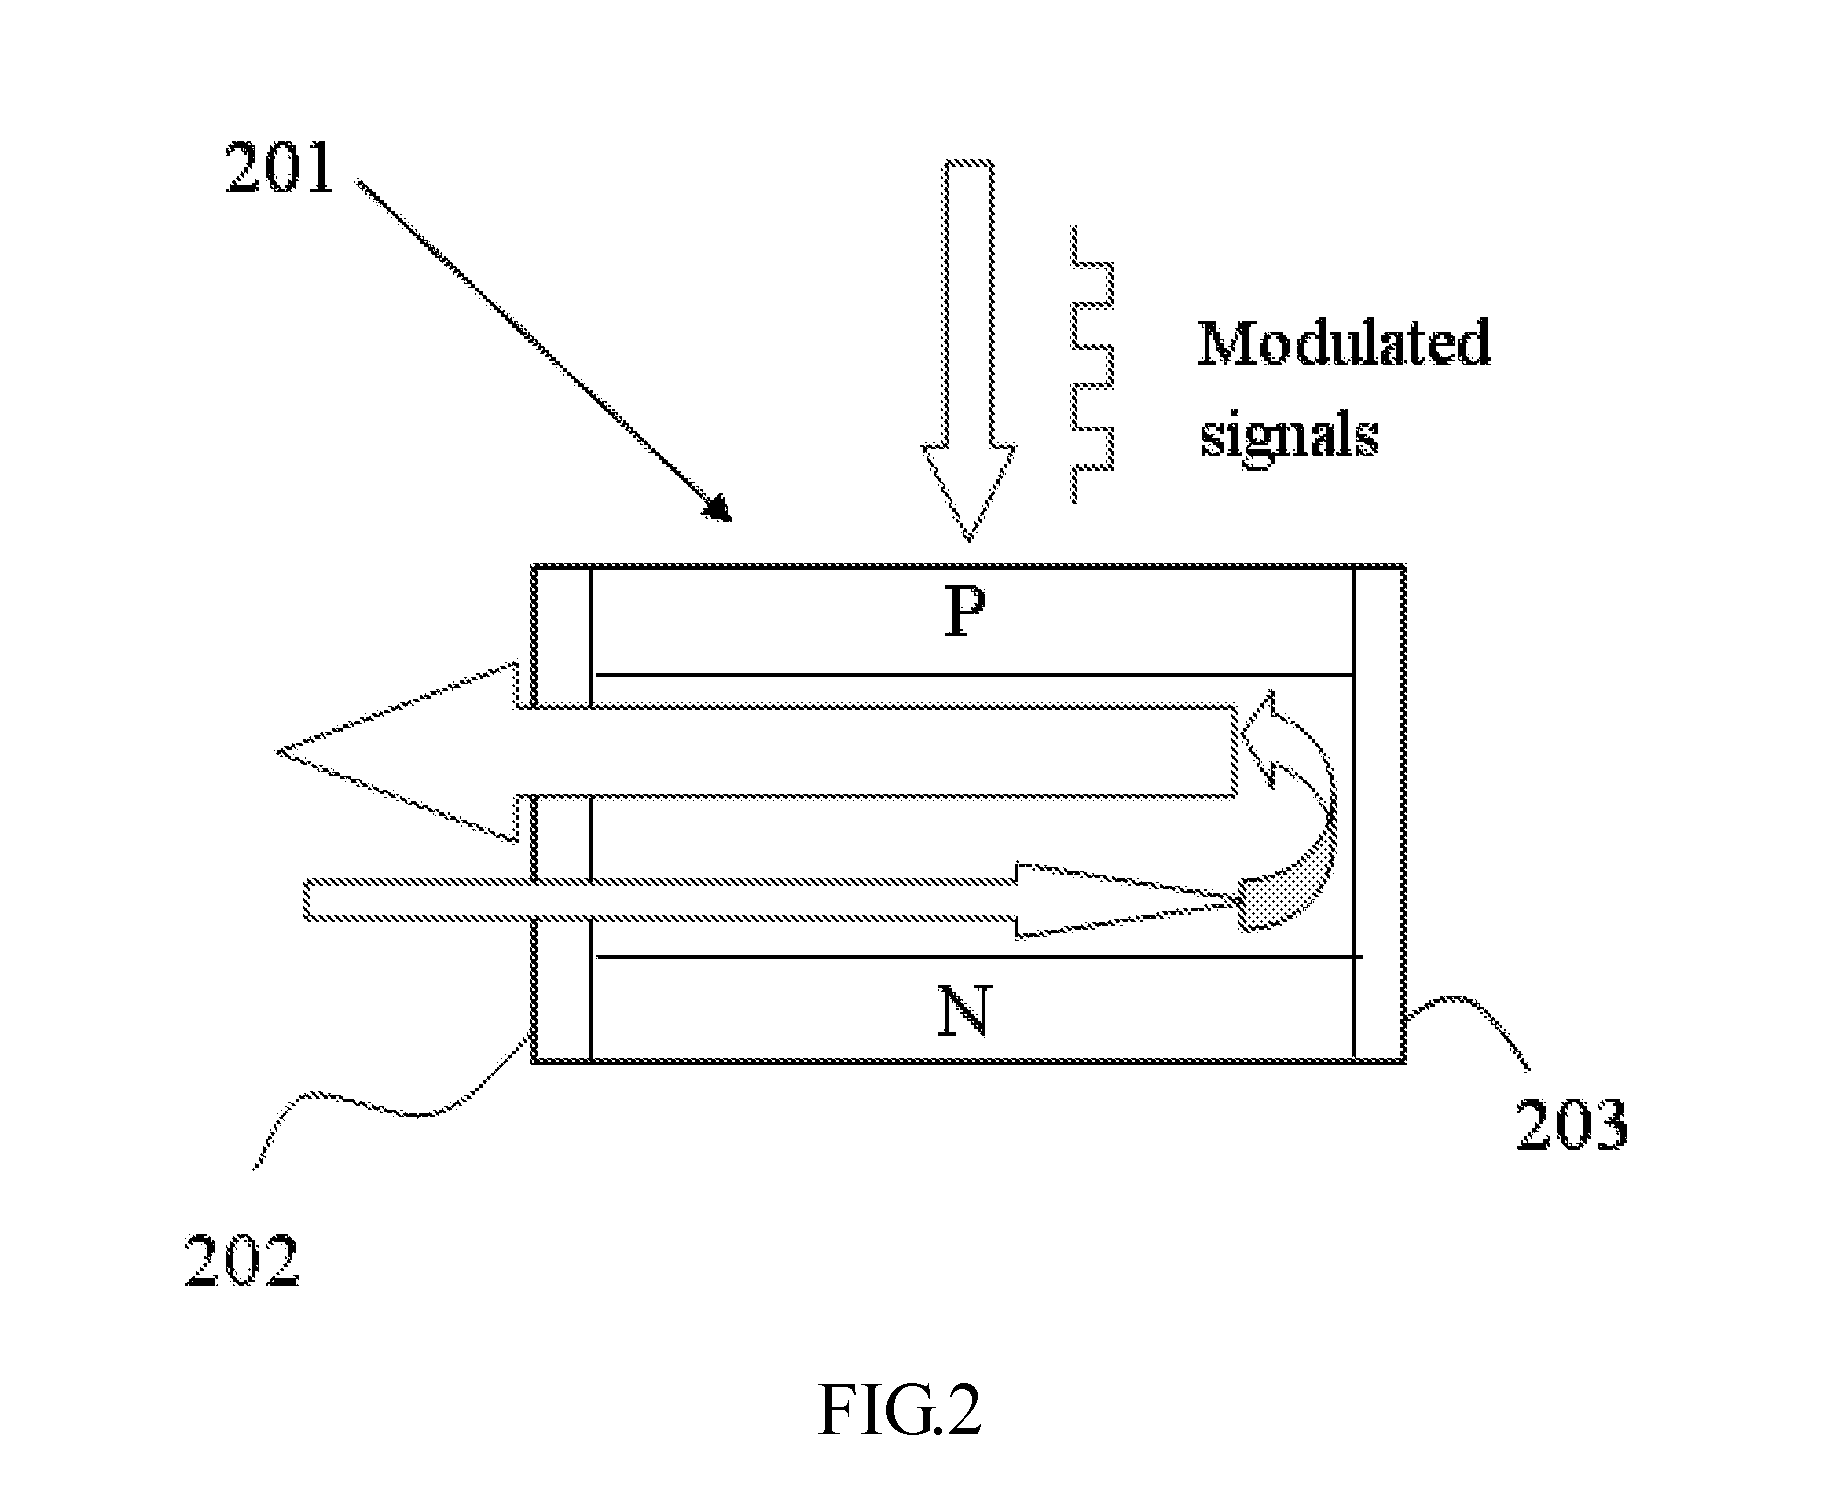 Fiber Ring Laser System and the Operation Method thereof